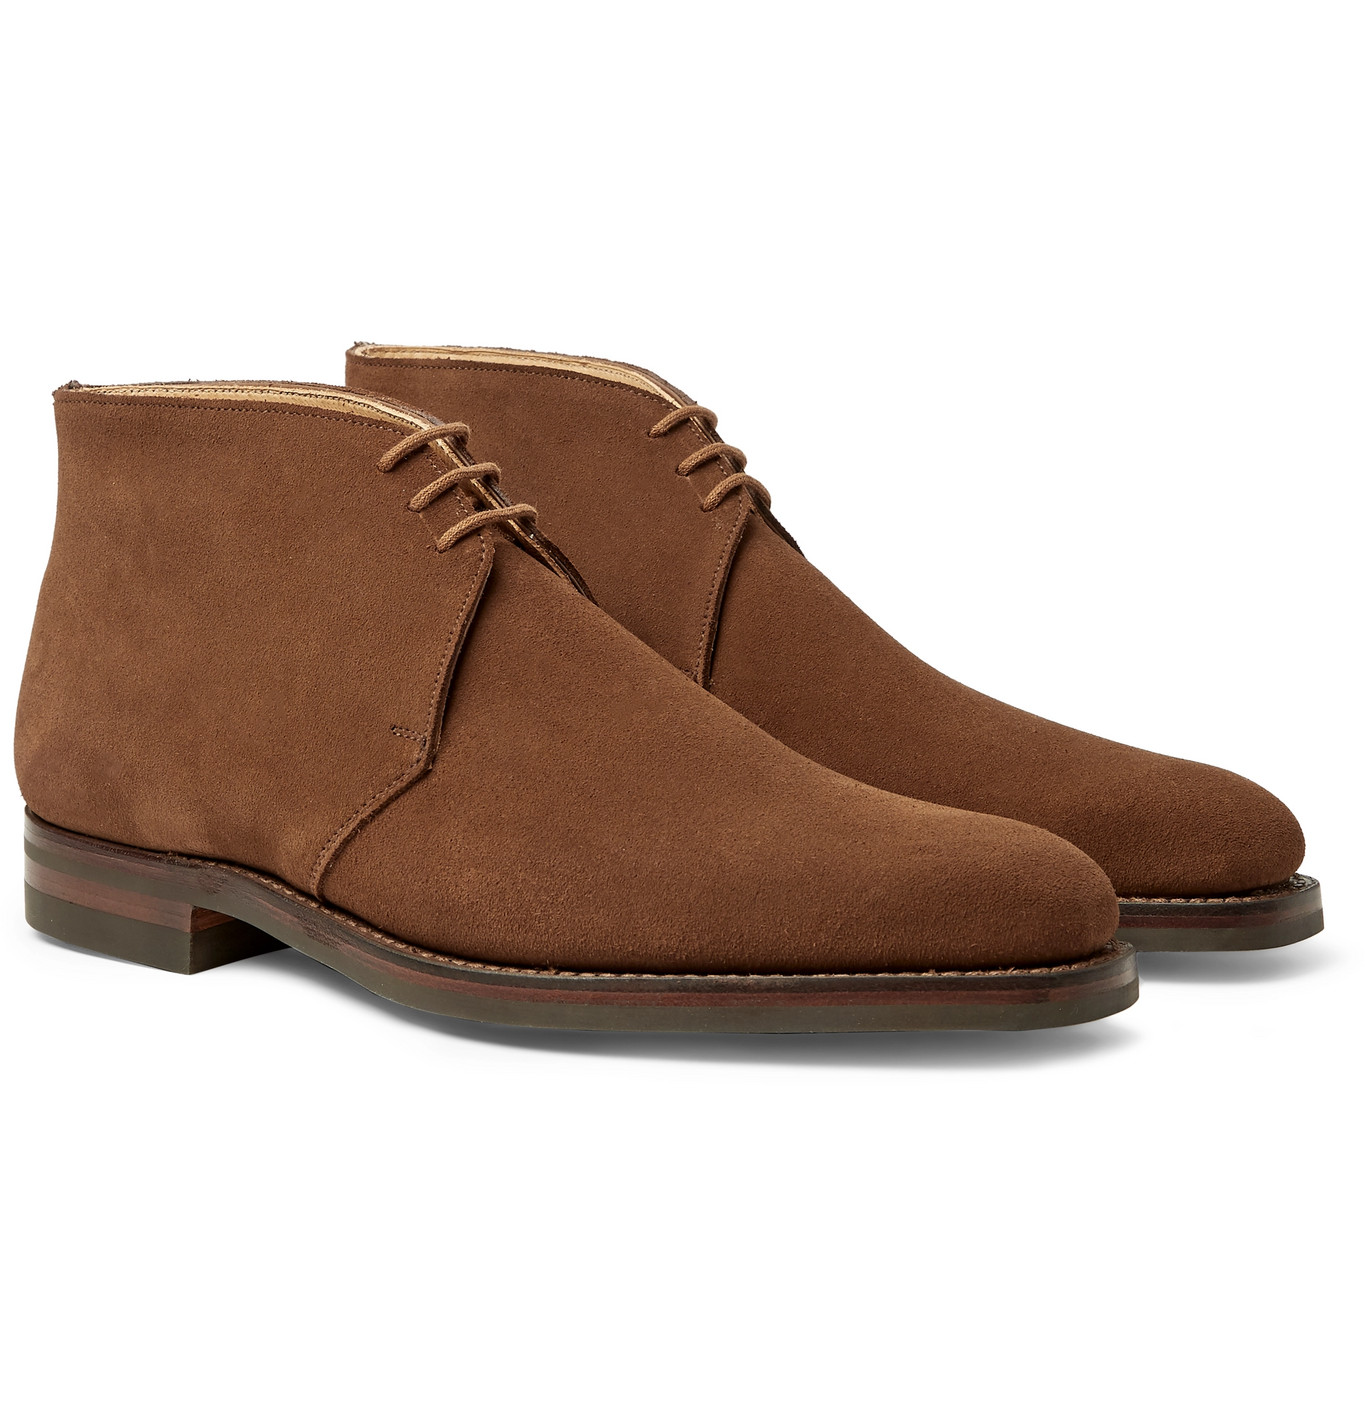 George Cleverley - Nathan Suede Chukka Boots - Men - Brown | The ...